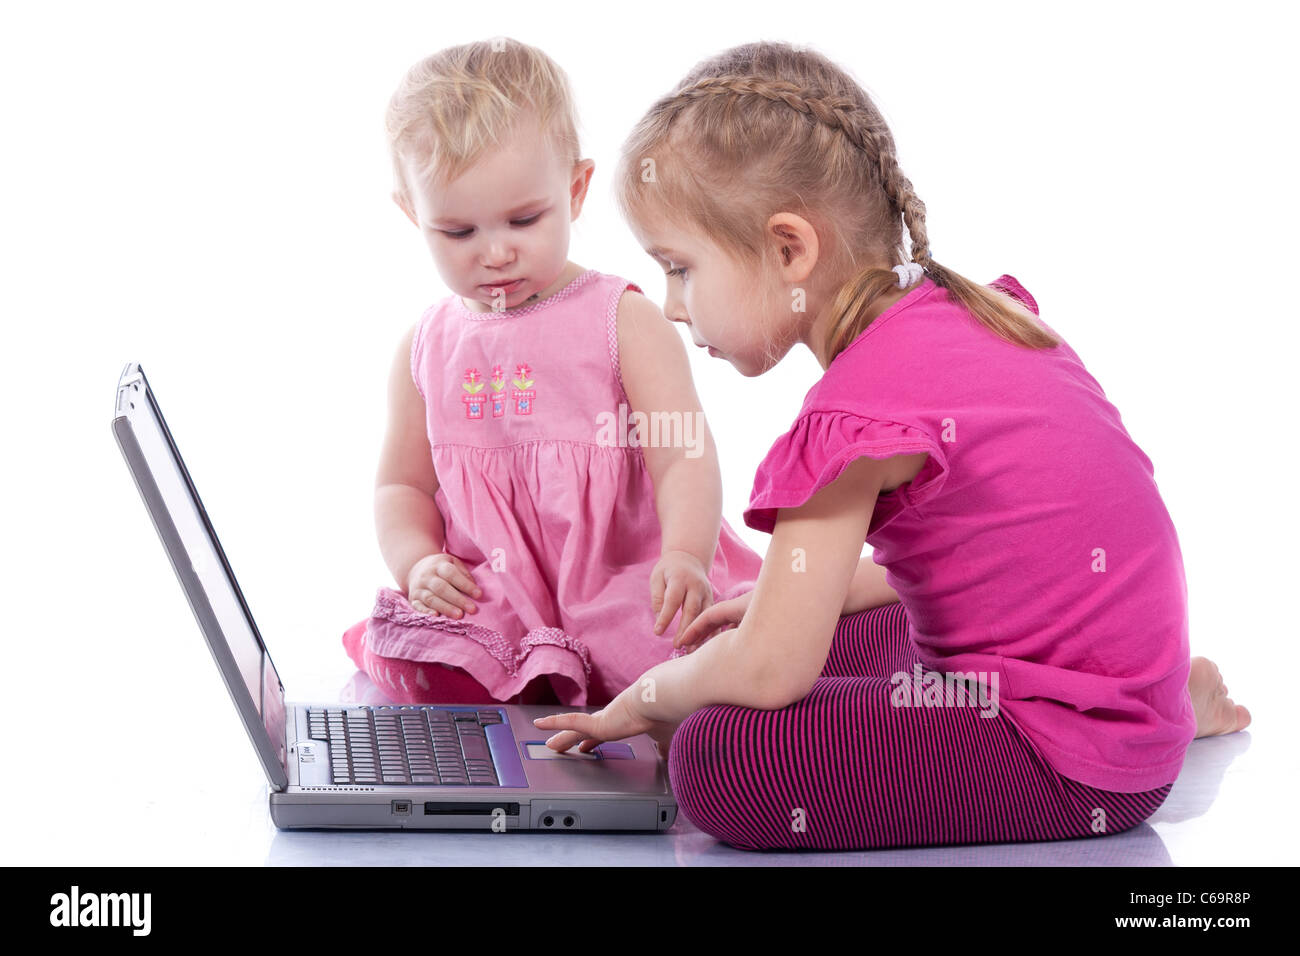 Kids playing computer game on laptop isolated on white Stock Photo